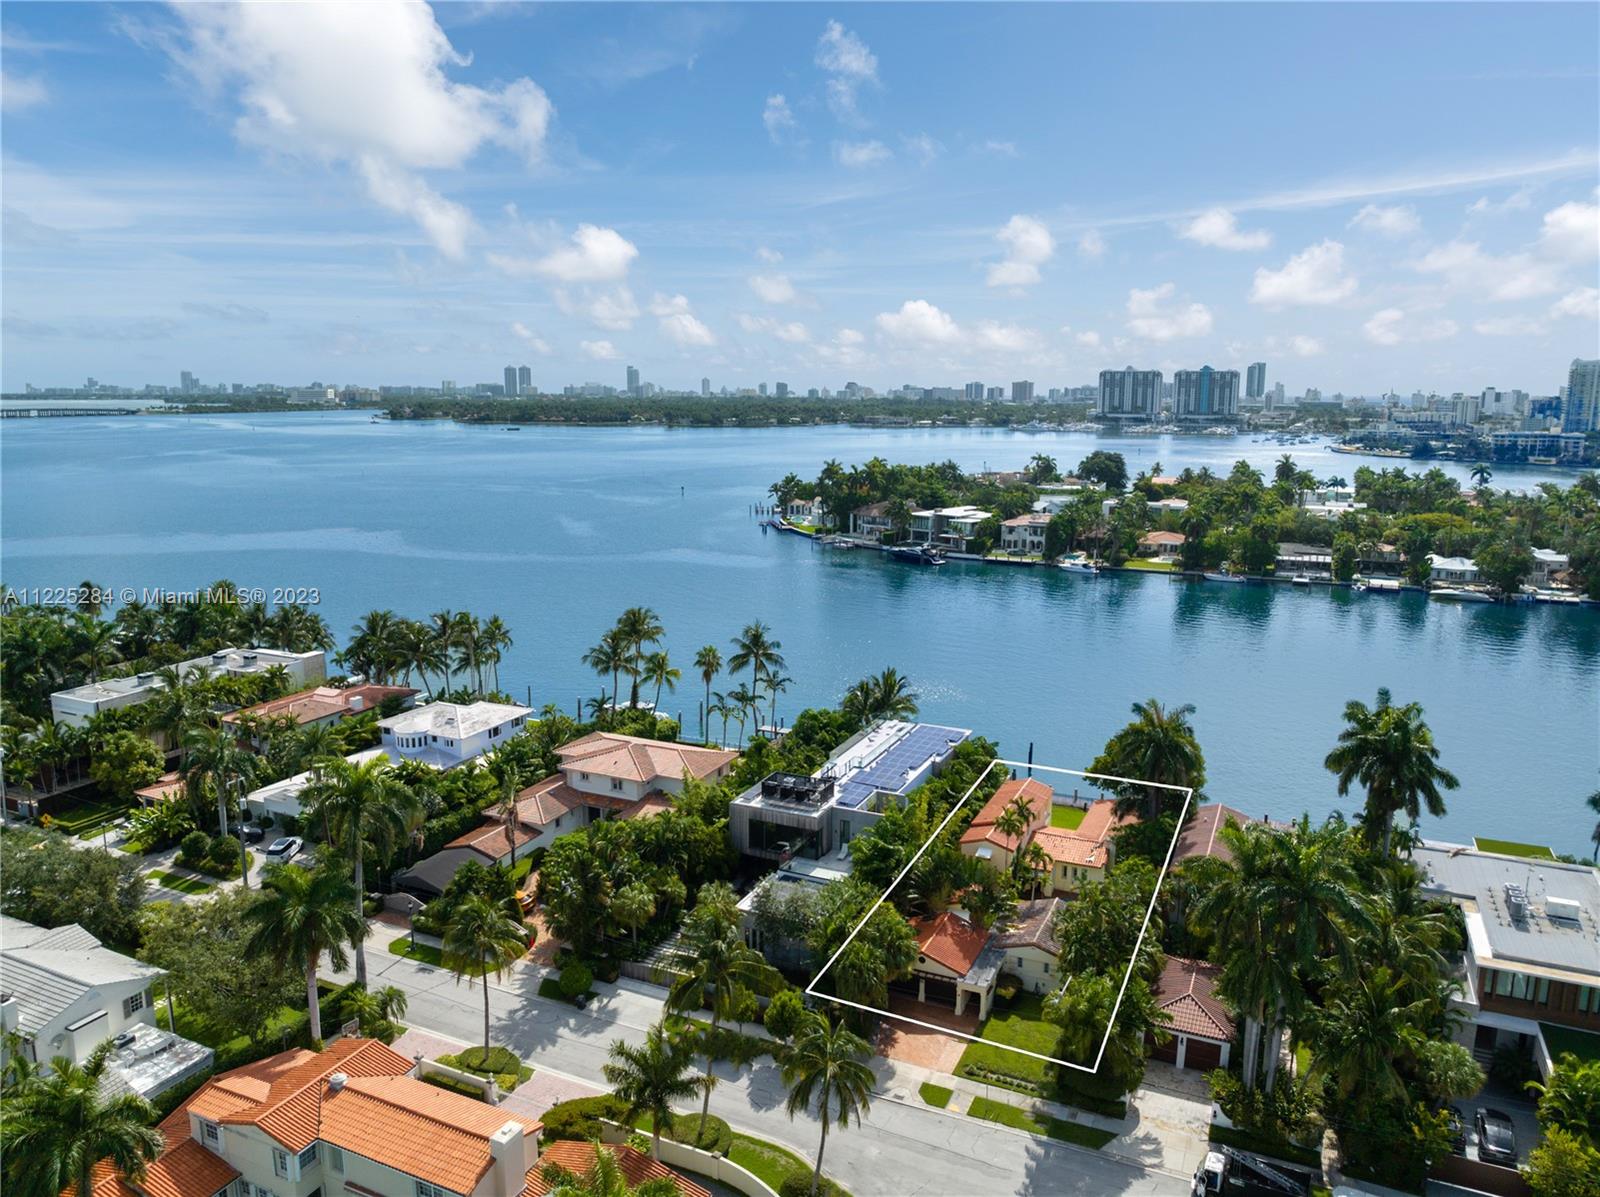 Introducing the lowest priced waterfront property on the Venetian Islands! This East facing cottage style home is positioned deep in from the causeway, allowing for peaceful living. With beautiful sunrises and premier water views, consider this offering your moment to invest in the ultimate Miami lifestyle. Take this opportunity to renovate or build a brand new modern home surrounded by $20mil-$30mil comps. Enjoy boating with direct bay access + 60 FT of water frontage. Situated on a 10,500 SF lot on premier Dilido Island. The coveted Venetian Islands are not just an in demand location, they are a lifestyle. Wake up and feel like you’re on vacation - brunch & shop in Sunset Harbour & relax on the beach. World-class restaurants, entertainment, fitness studios & shops are all just mins away.